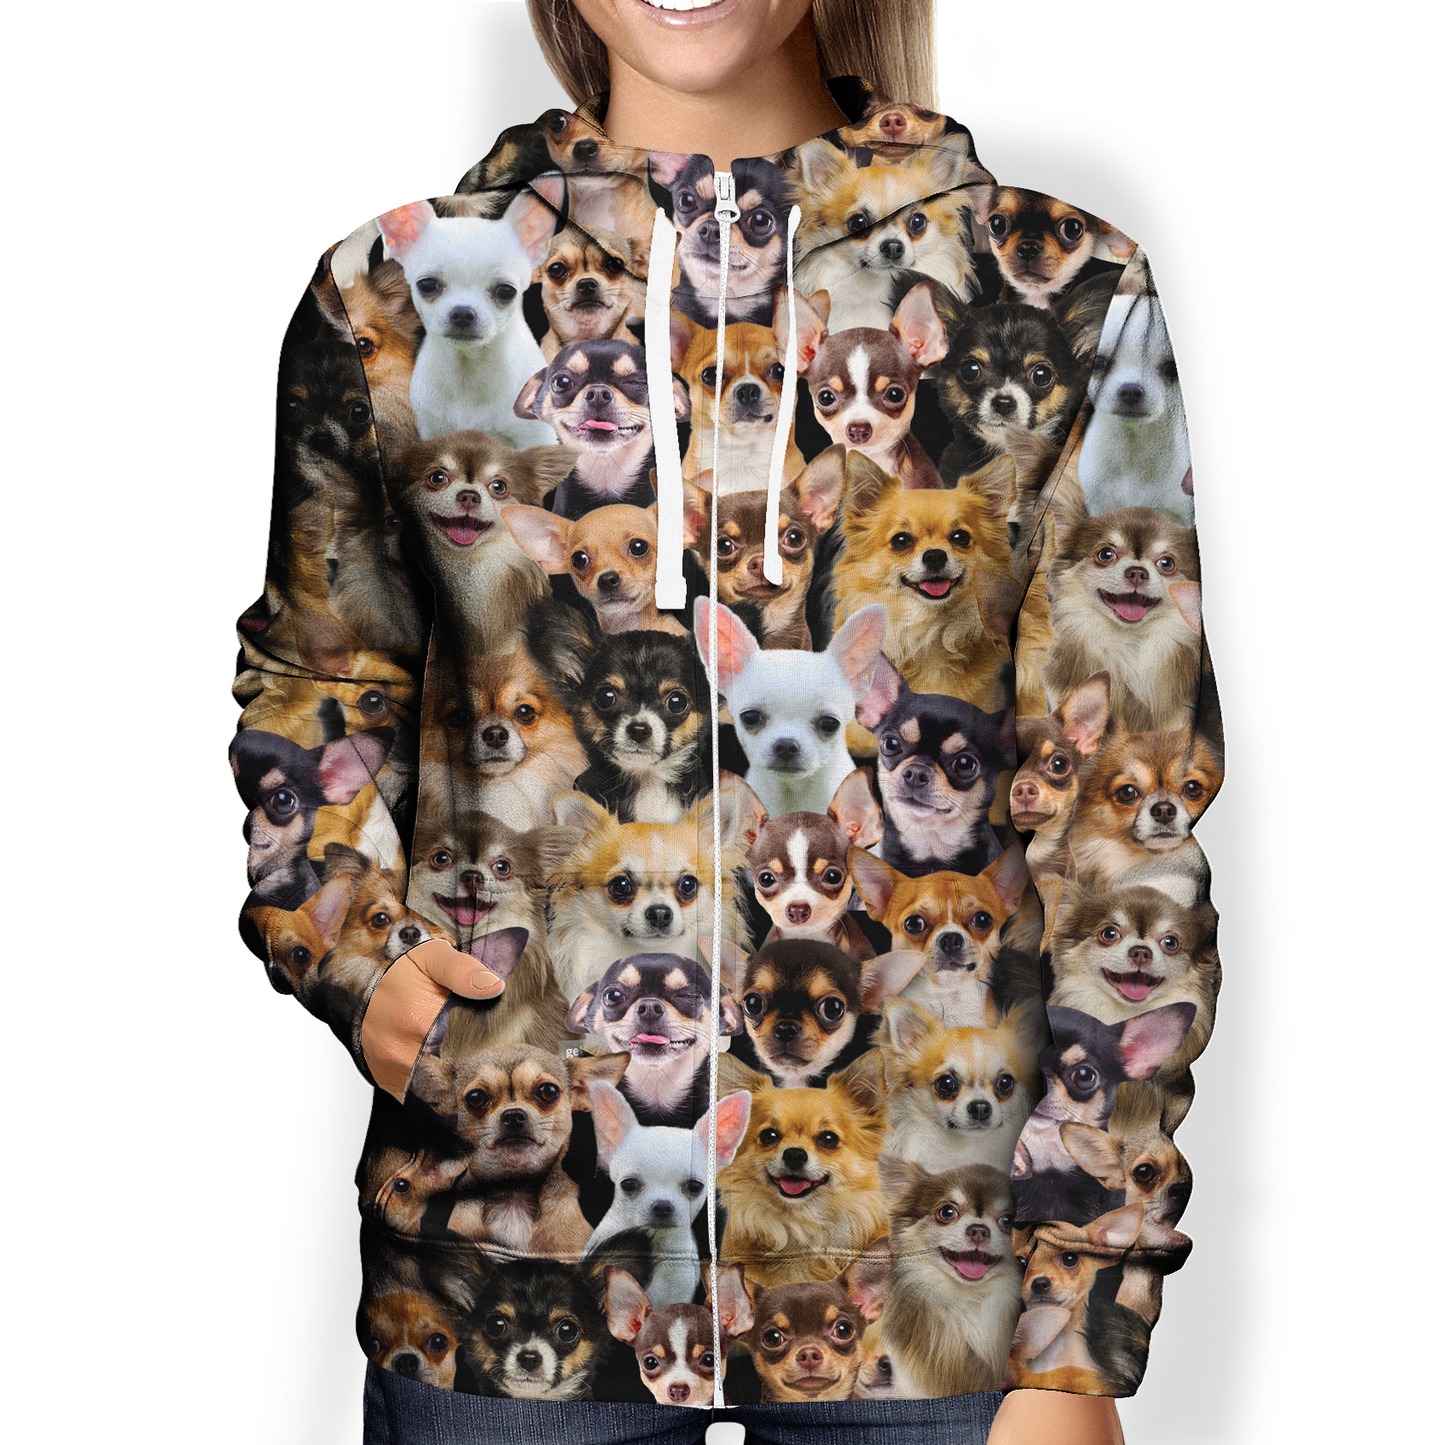 You Will Have A Bunch Of Chihuahuas - Hoodie V1